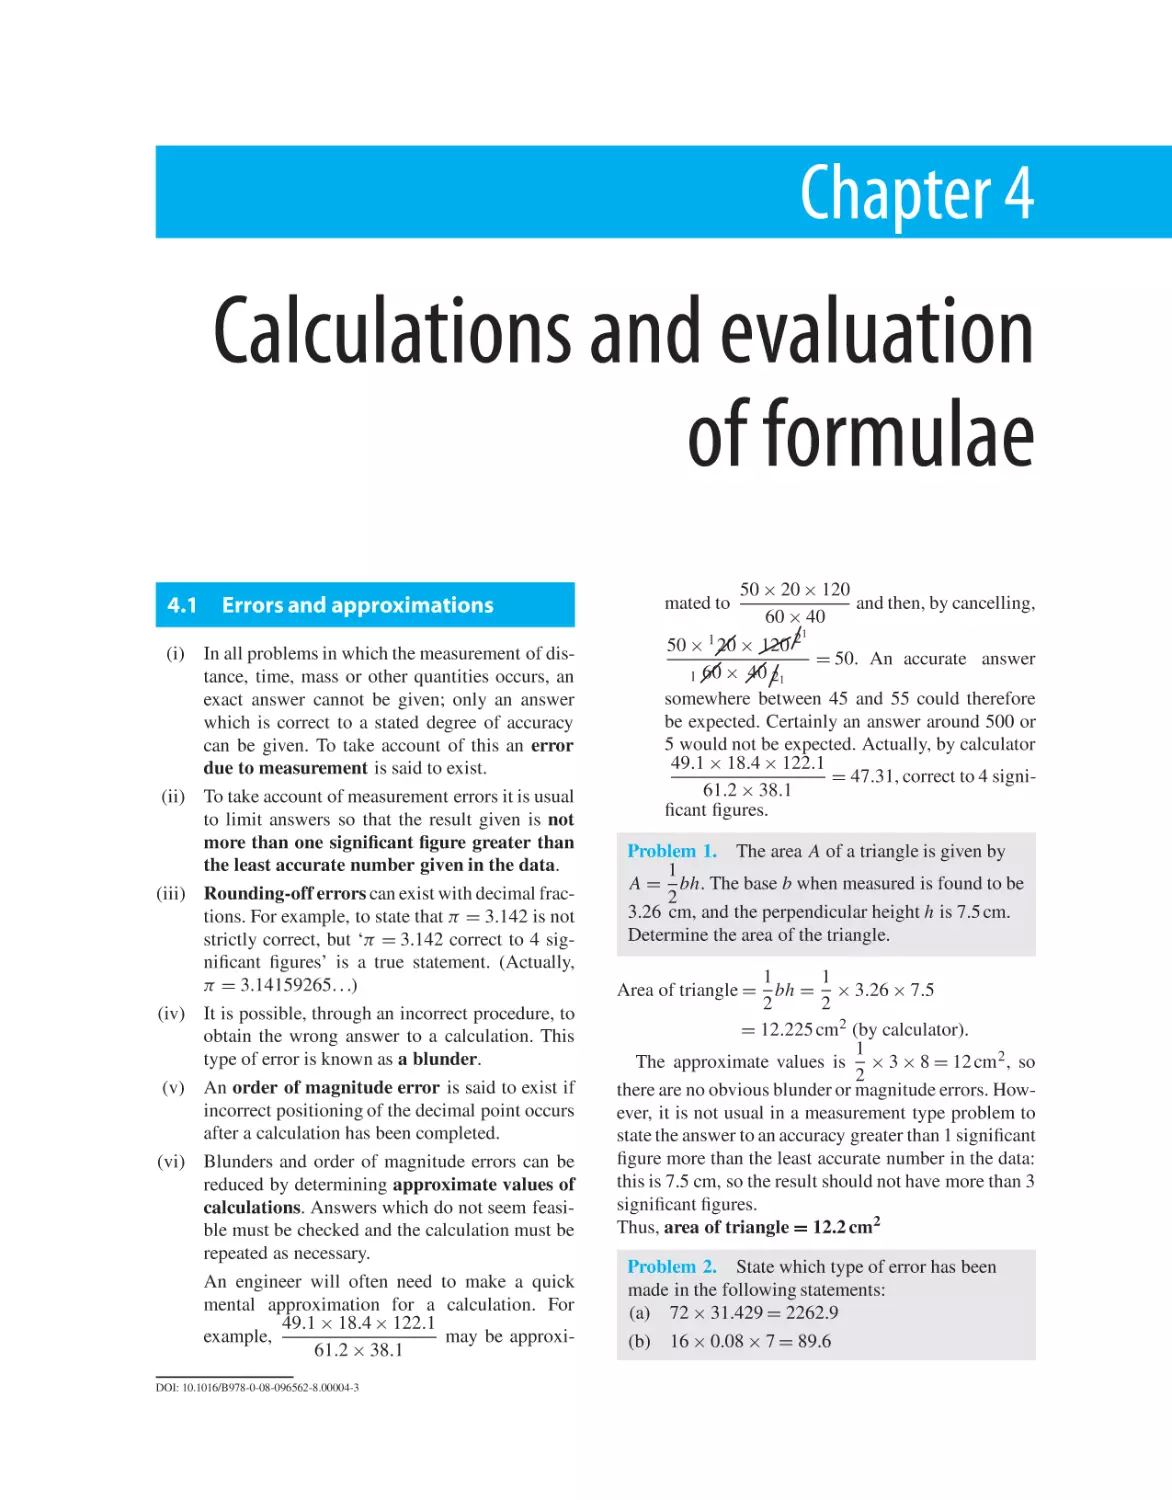 Chapter 4. Calculations and evaluation of formulae
4.1 Errors and approximations